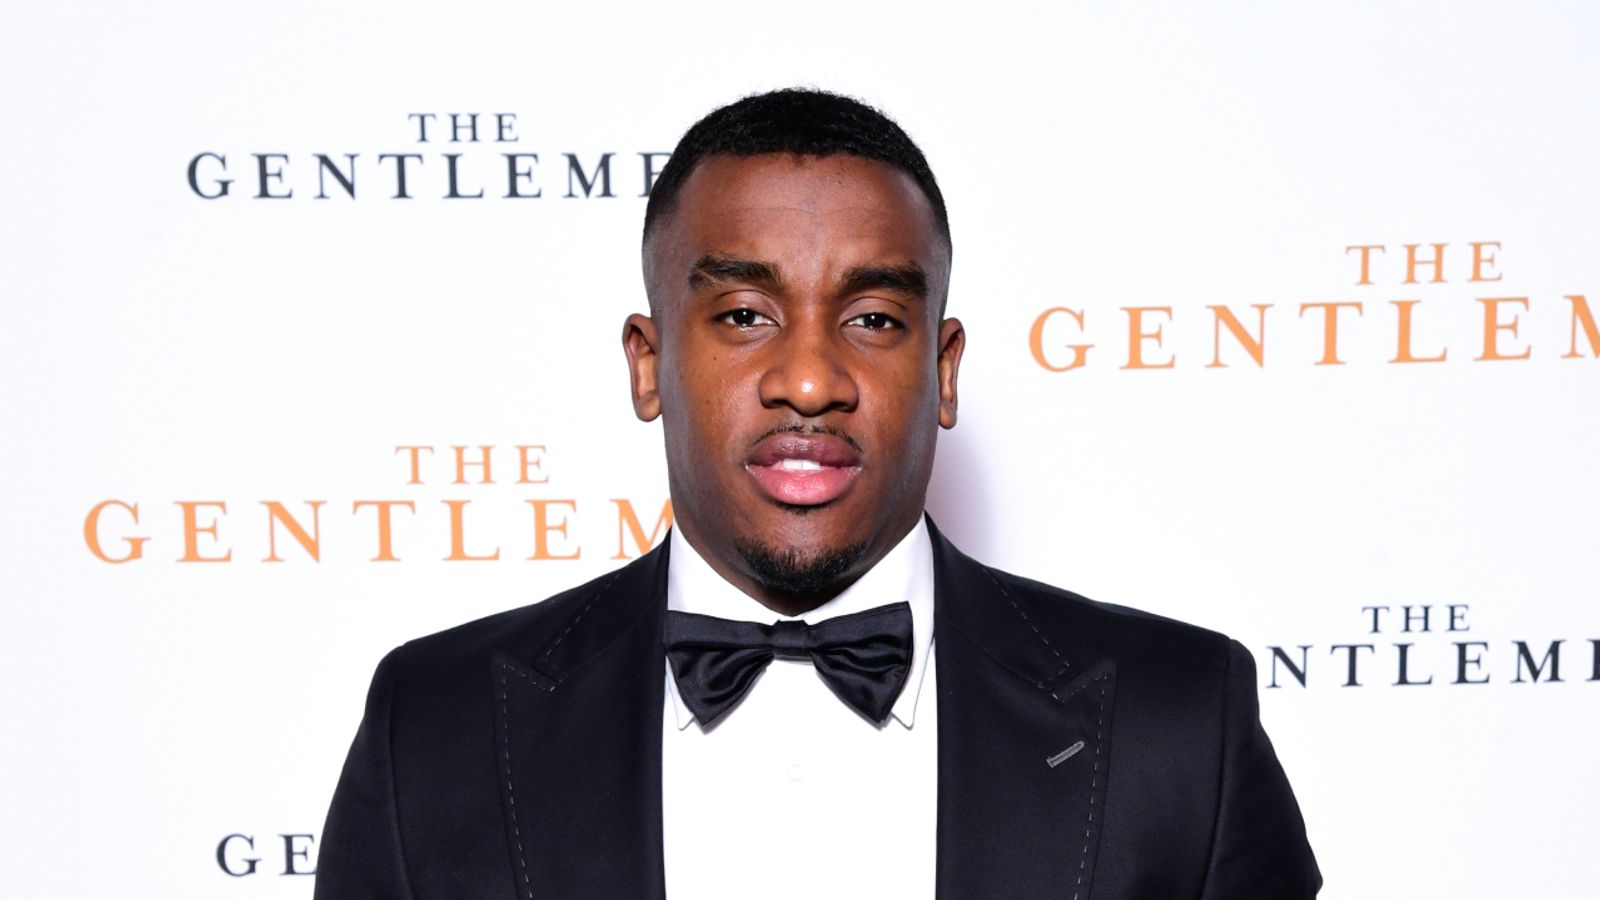 HipHopDX United Kingdom - Bugzy Malone gives an update on his